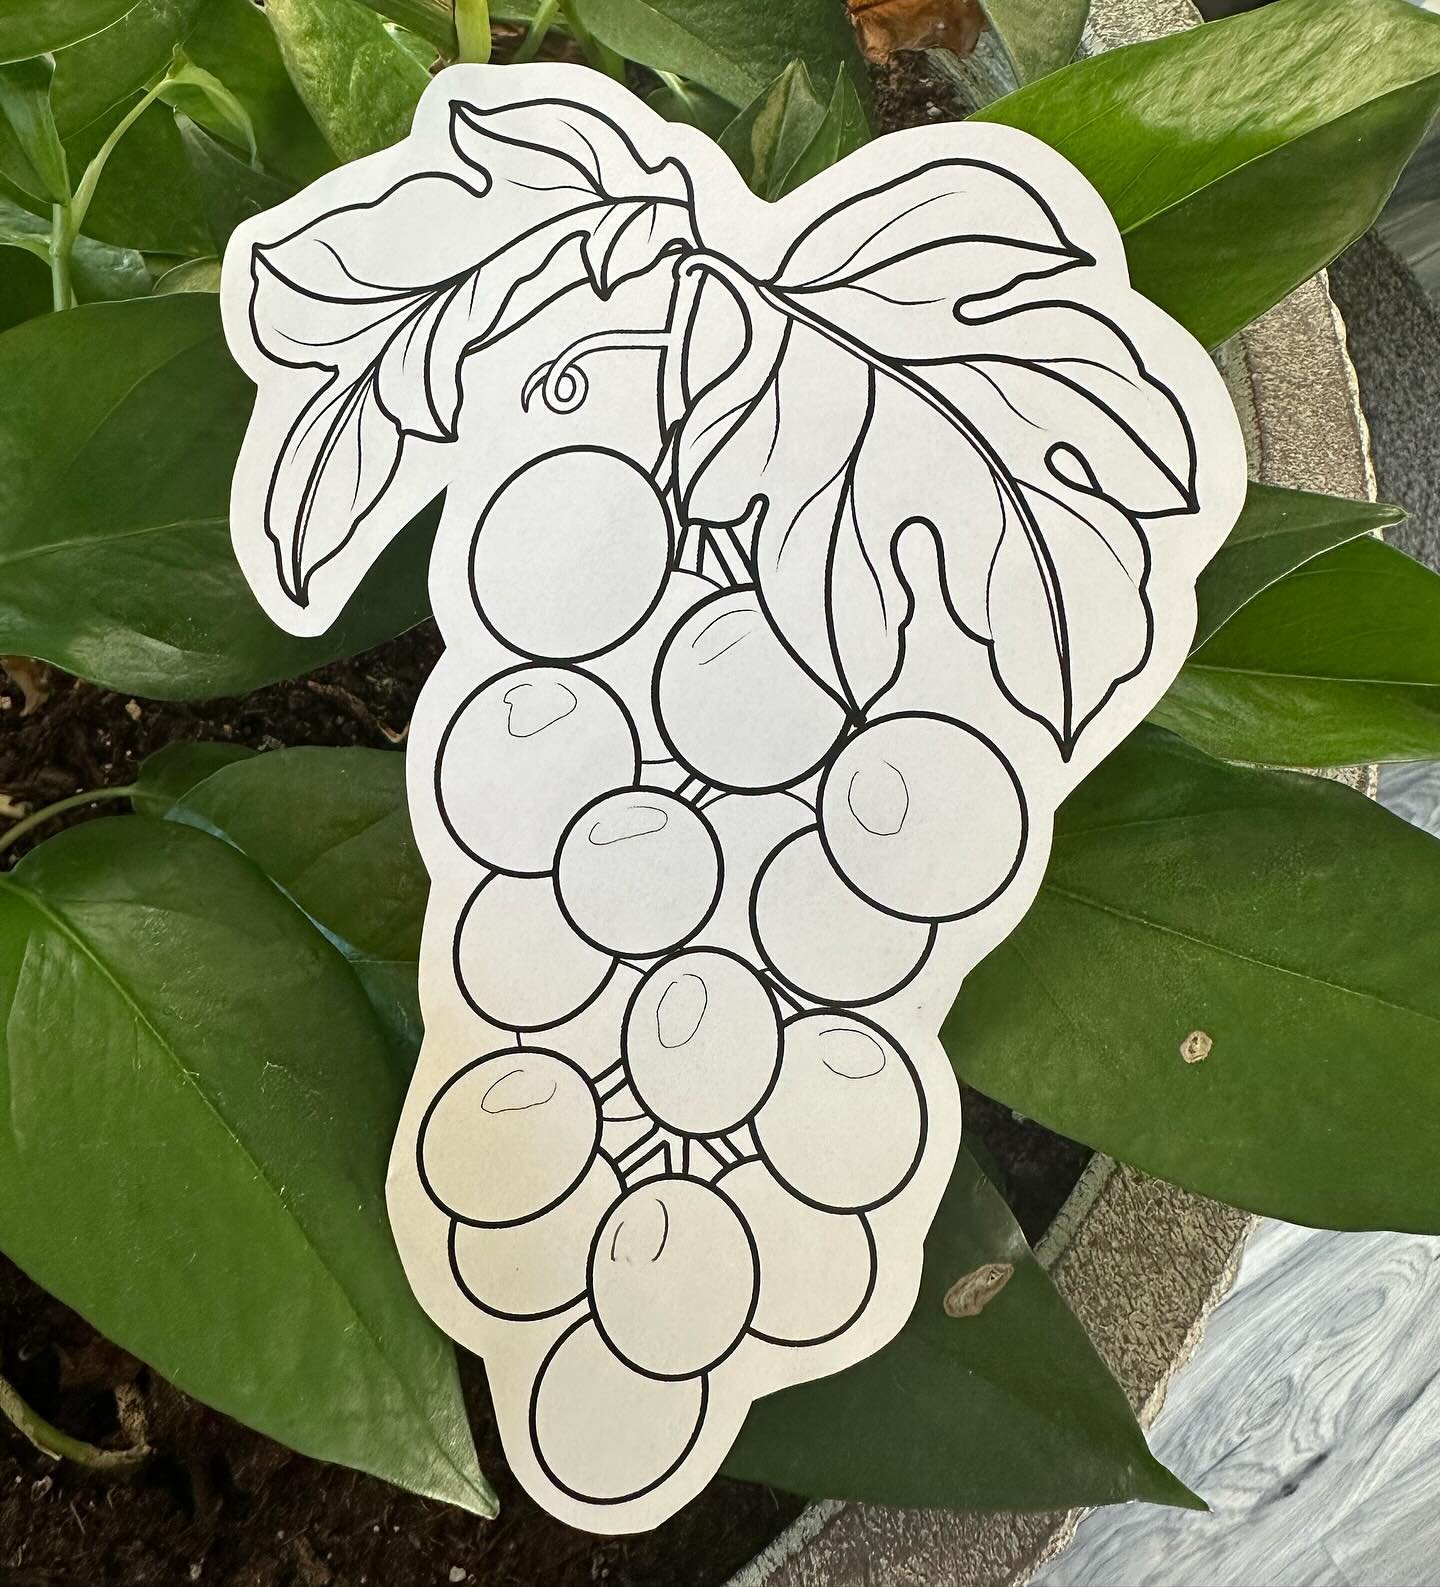 I&rsquo;ve had some days open this month and next and would like to fill them with these fruits! Dm if interested. 
.
.
.
.
#grapetattoo #plumtattoo #orangetattoo #eugeneoregon #oregon #oregontattoo #pnw #pdx #corvallisoregon #salemoregon #portlandor